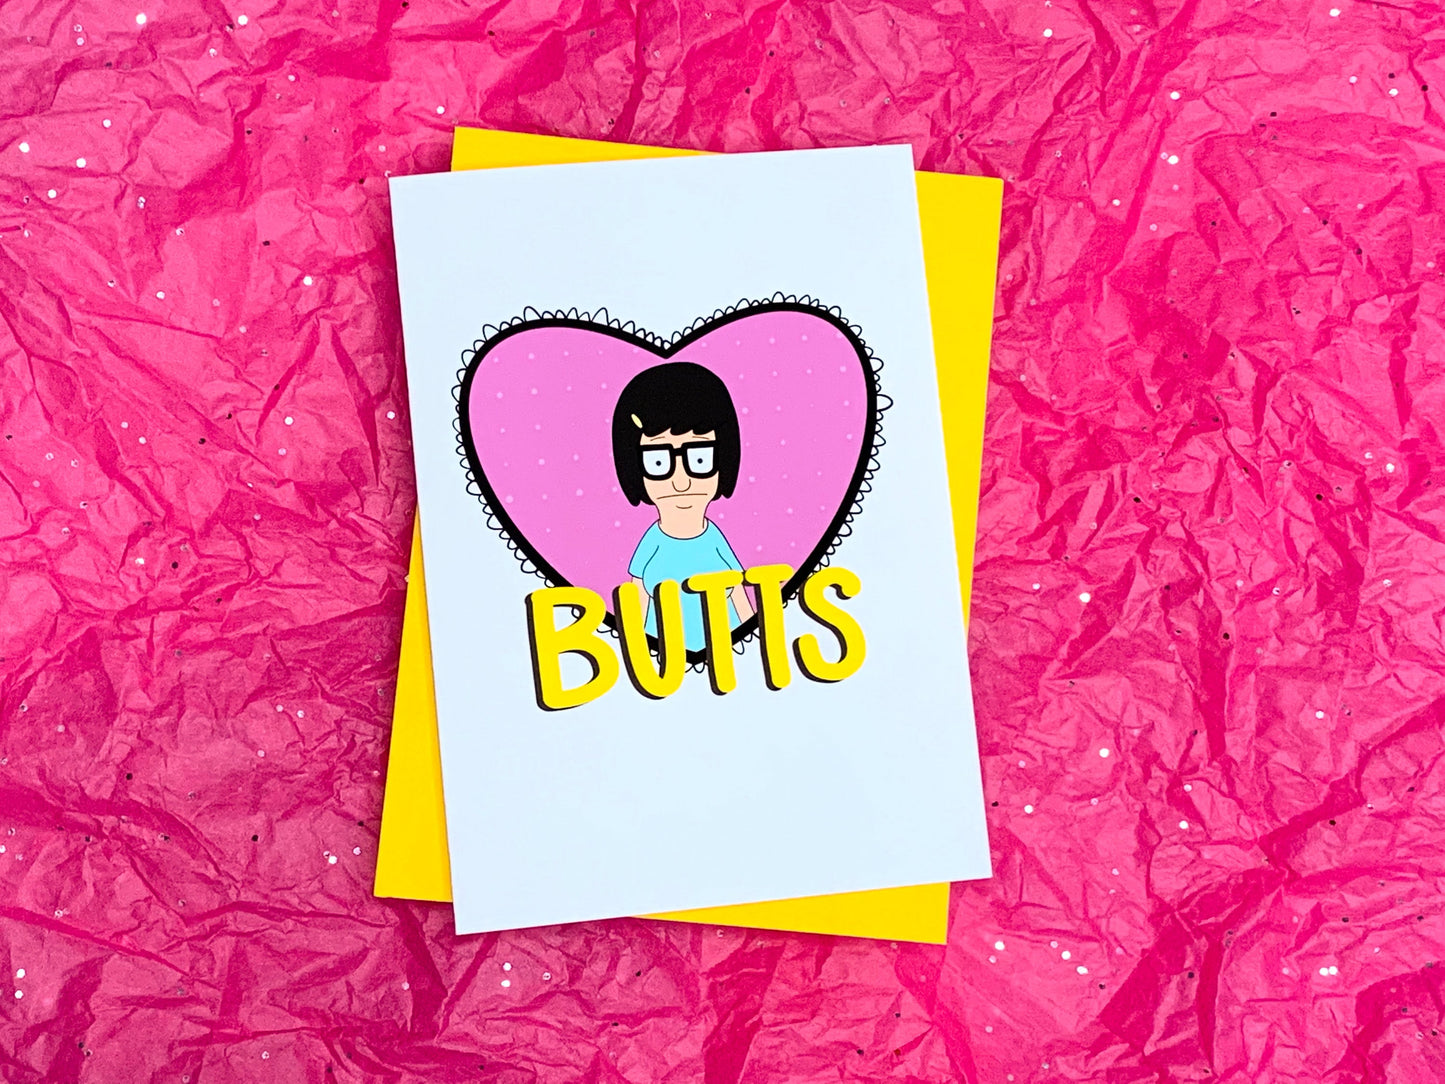 Tina Butts Bob's Burger's-Inspired Valentine's Day Card by StoneDonut Design